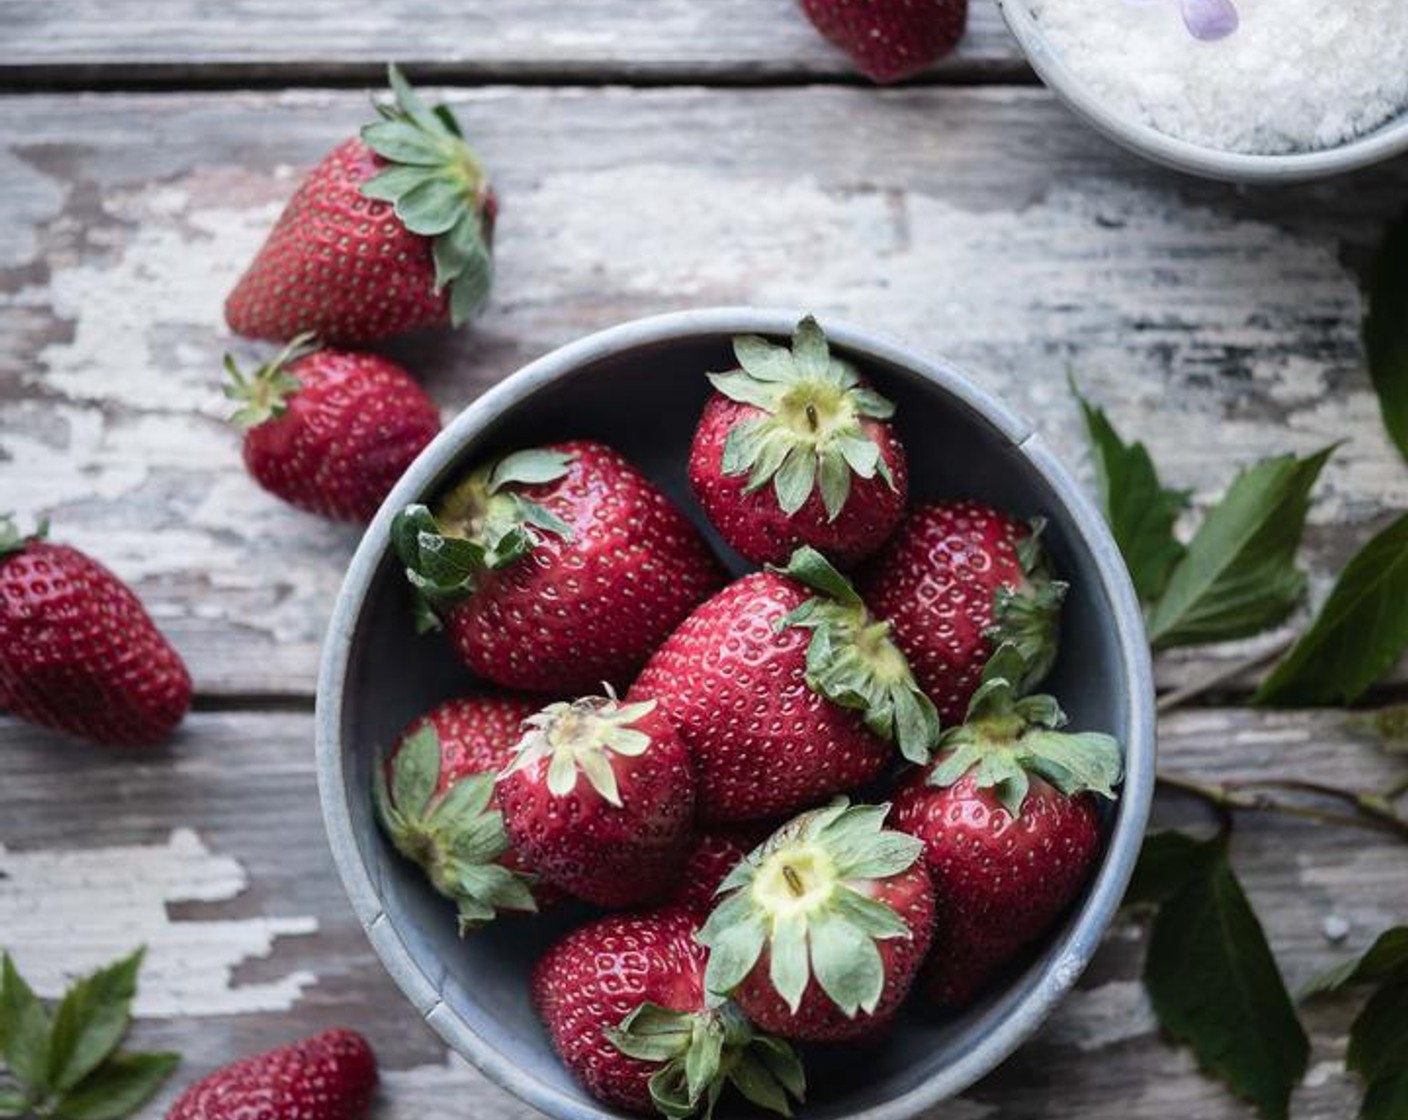 step 1 Mix Fresh Strawberries (12 cups) with Lilac Sugar (1/4 cup) in medium bowl; set aside while preparing shortcakes or up to 2 hours.